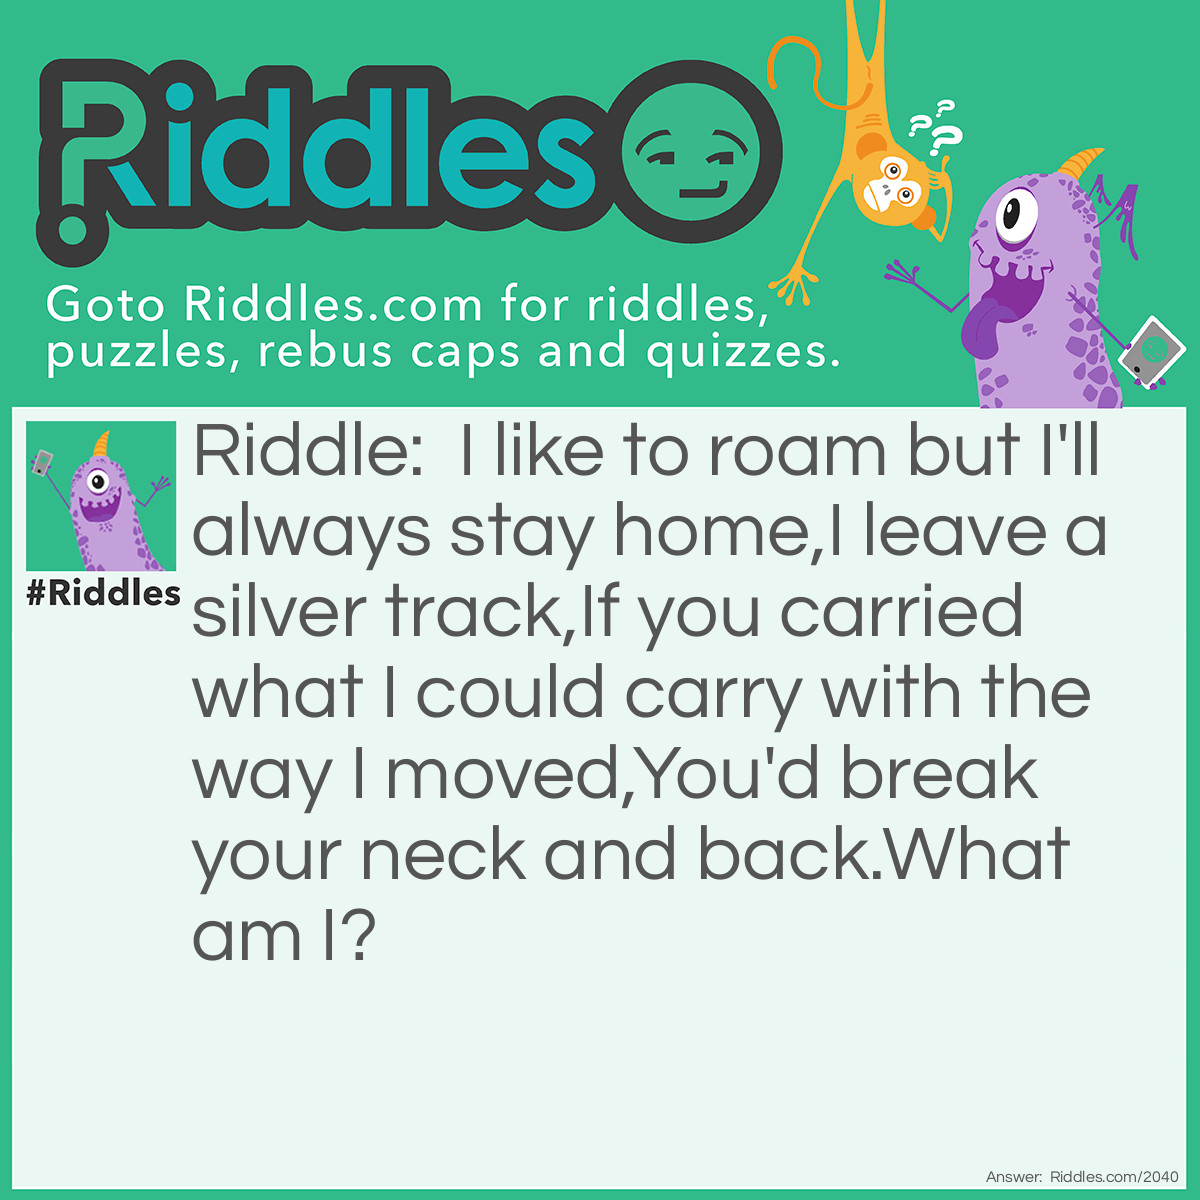 Riddle: I like to roam but I'll always stay home, 
I leave a silver track, 
If you carried what I could carry with the way I moved, 
You'd break your neck and back. 
What am I? Answer: A Snail.